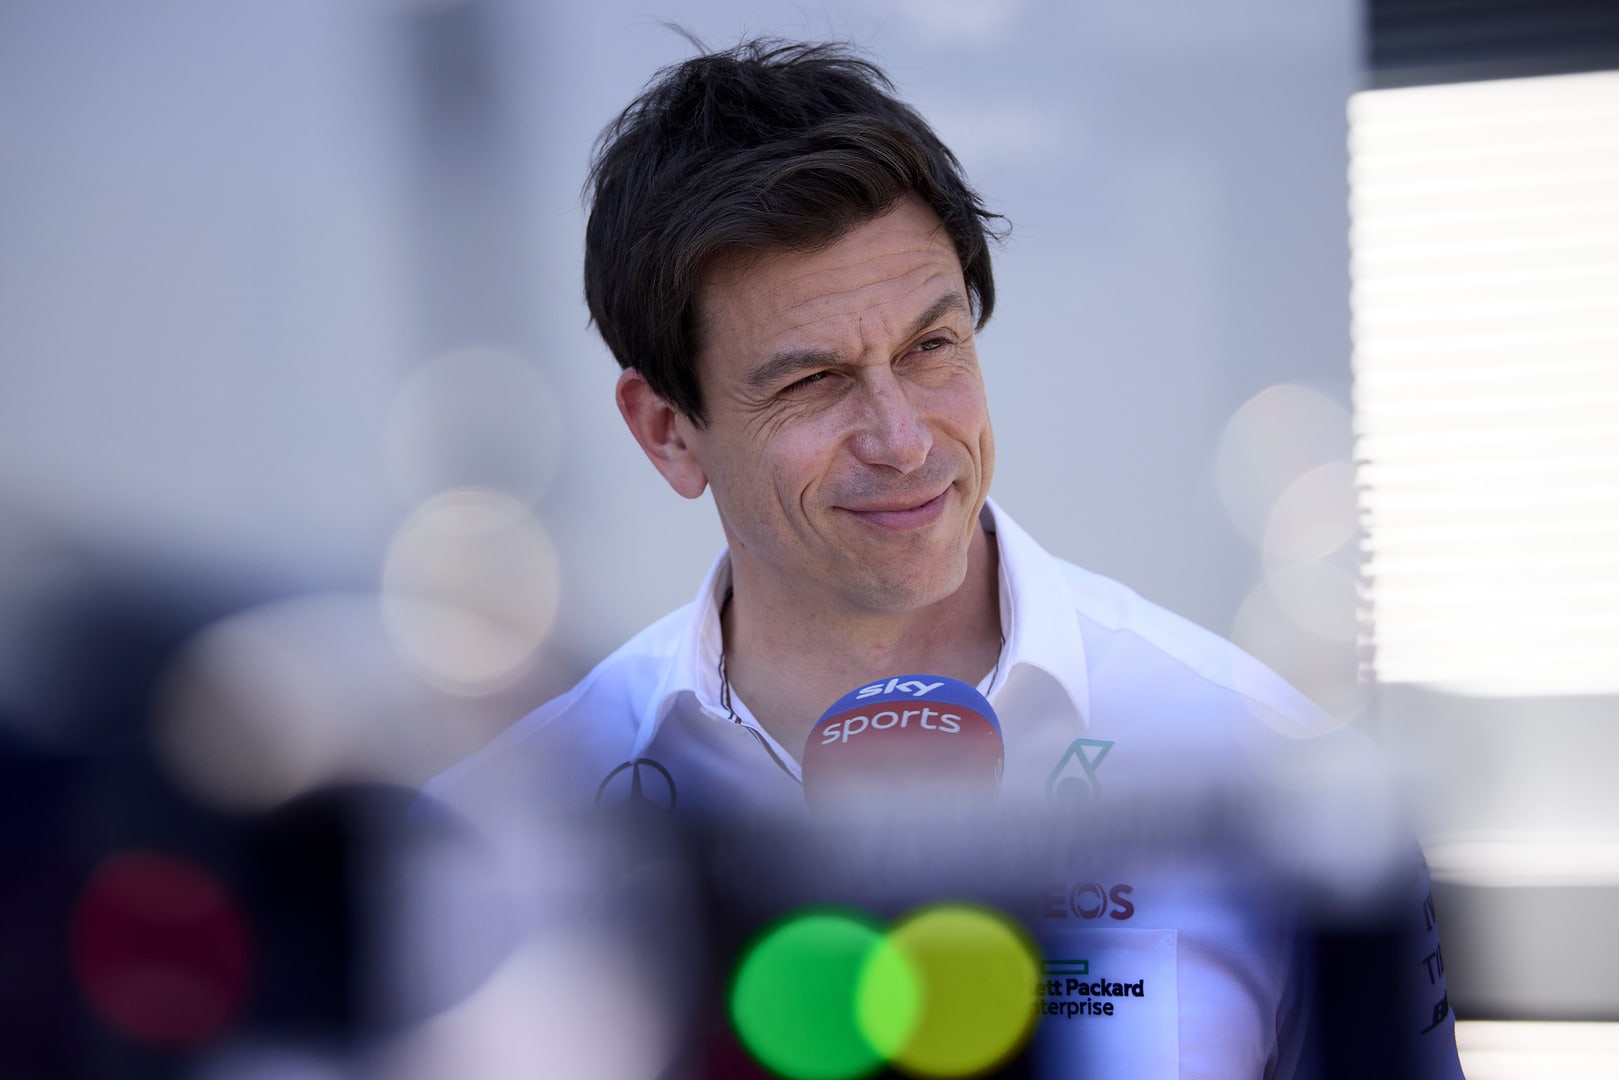 2021 Hungarian Grand Prix, Friday - Toto Wolff